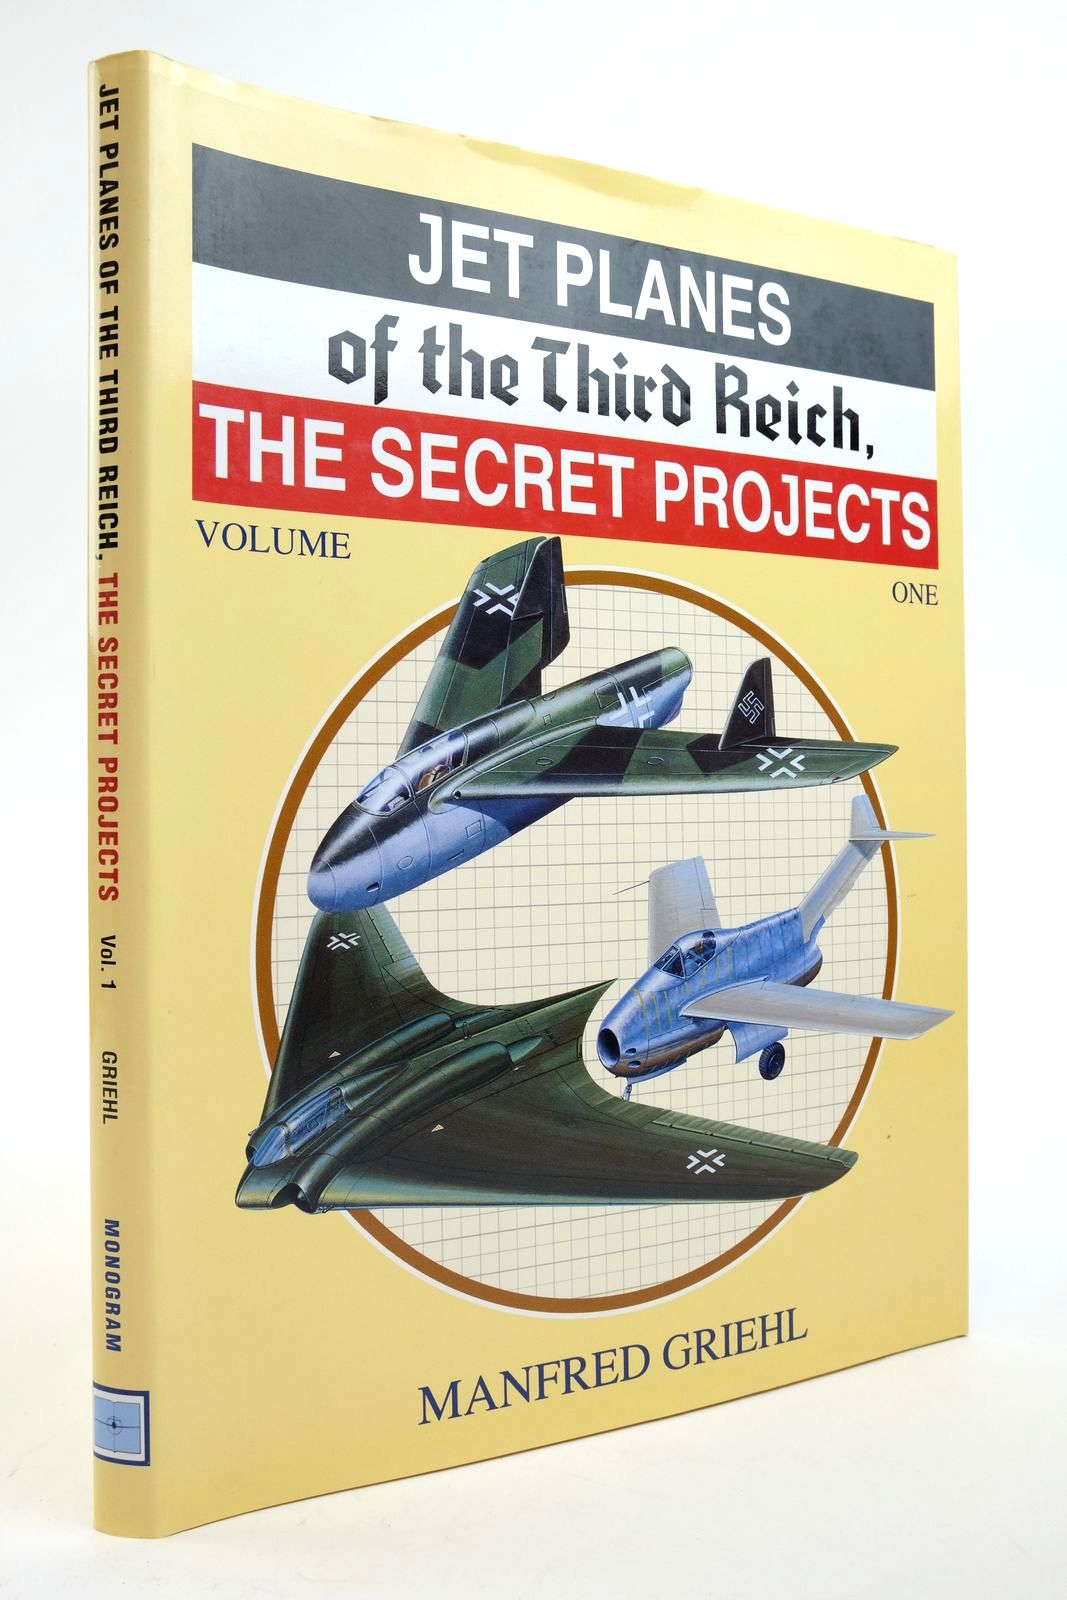 Photo of JET PLANES OF THE THIRD REICH THE SECRET PROJECTS VOLUME ONE written by Griehl, Manfred published by Monogram Aviation Publications (STOCK CODE: 2138658)  for sale by Stella & Rose's Books